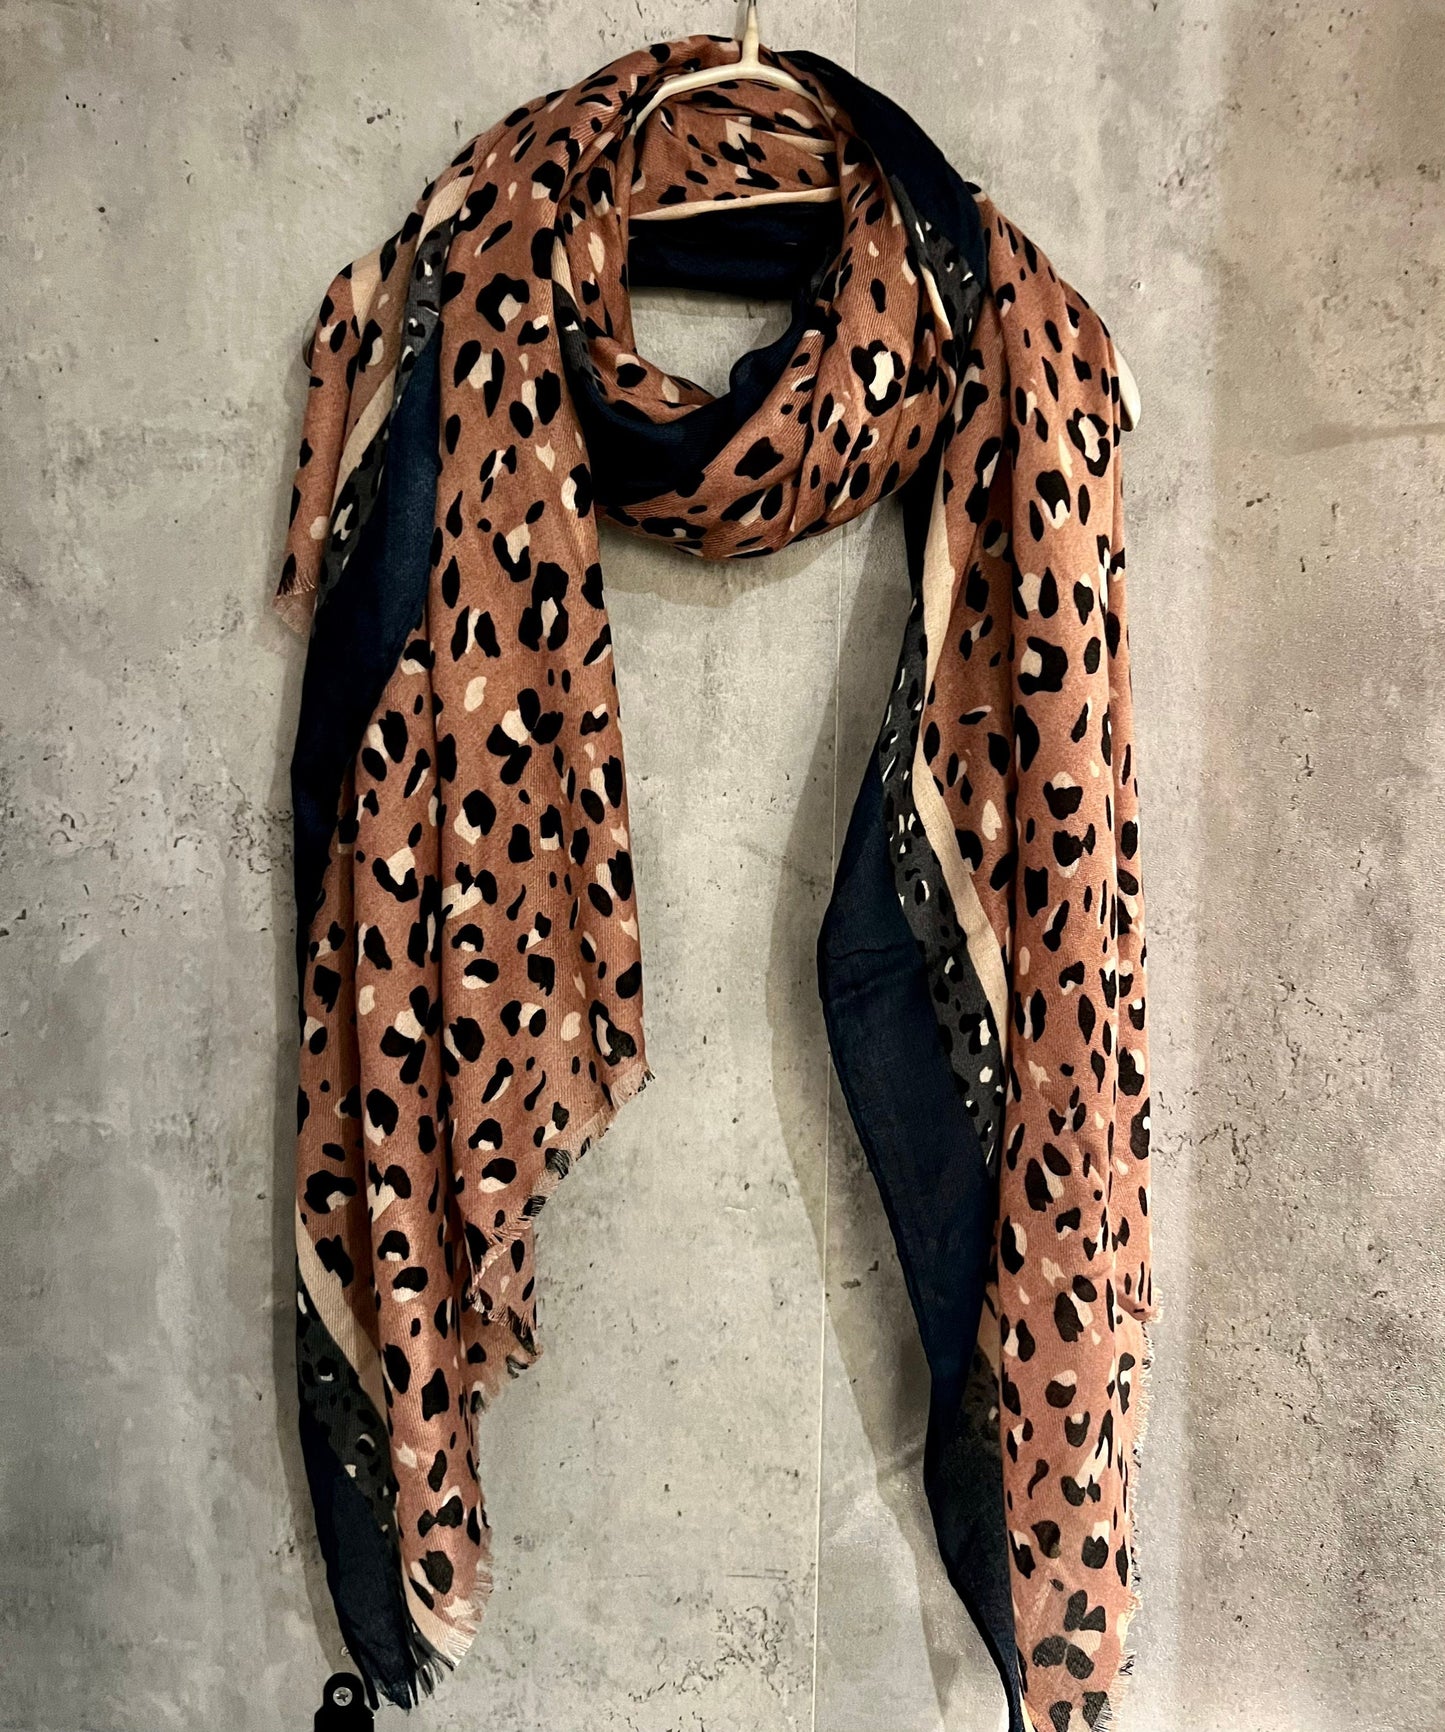 Leopard Pattern With Blue Trim Brown Cotton Scarf/Summer  Autumn Scarf/Scarf Women/Gifts For Mum/Gifts For Her Birthday Christmas/UK Seller